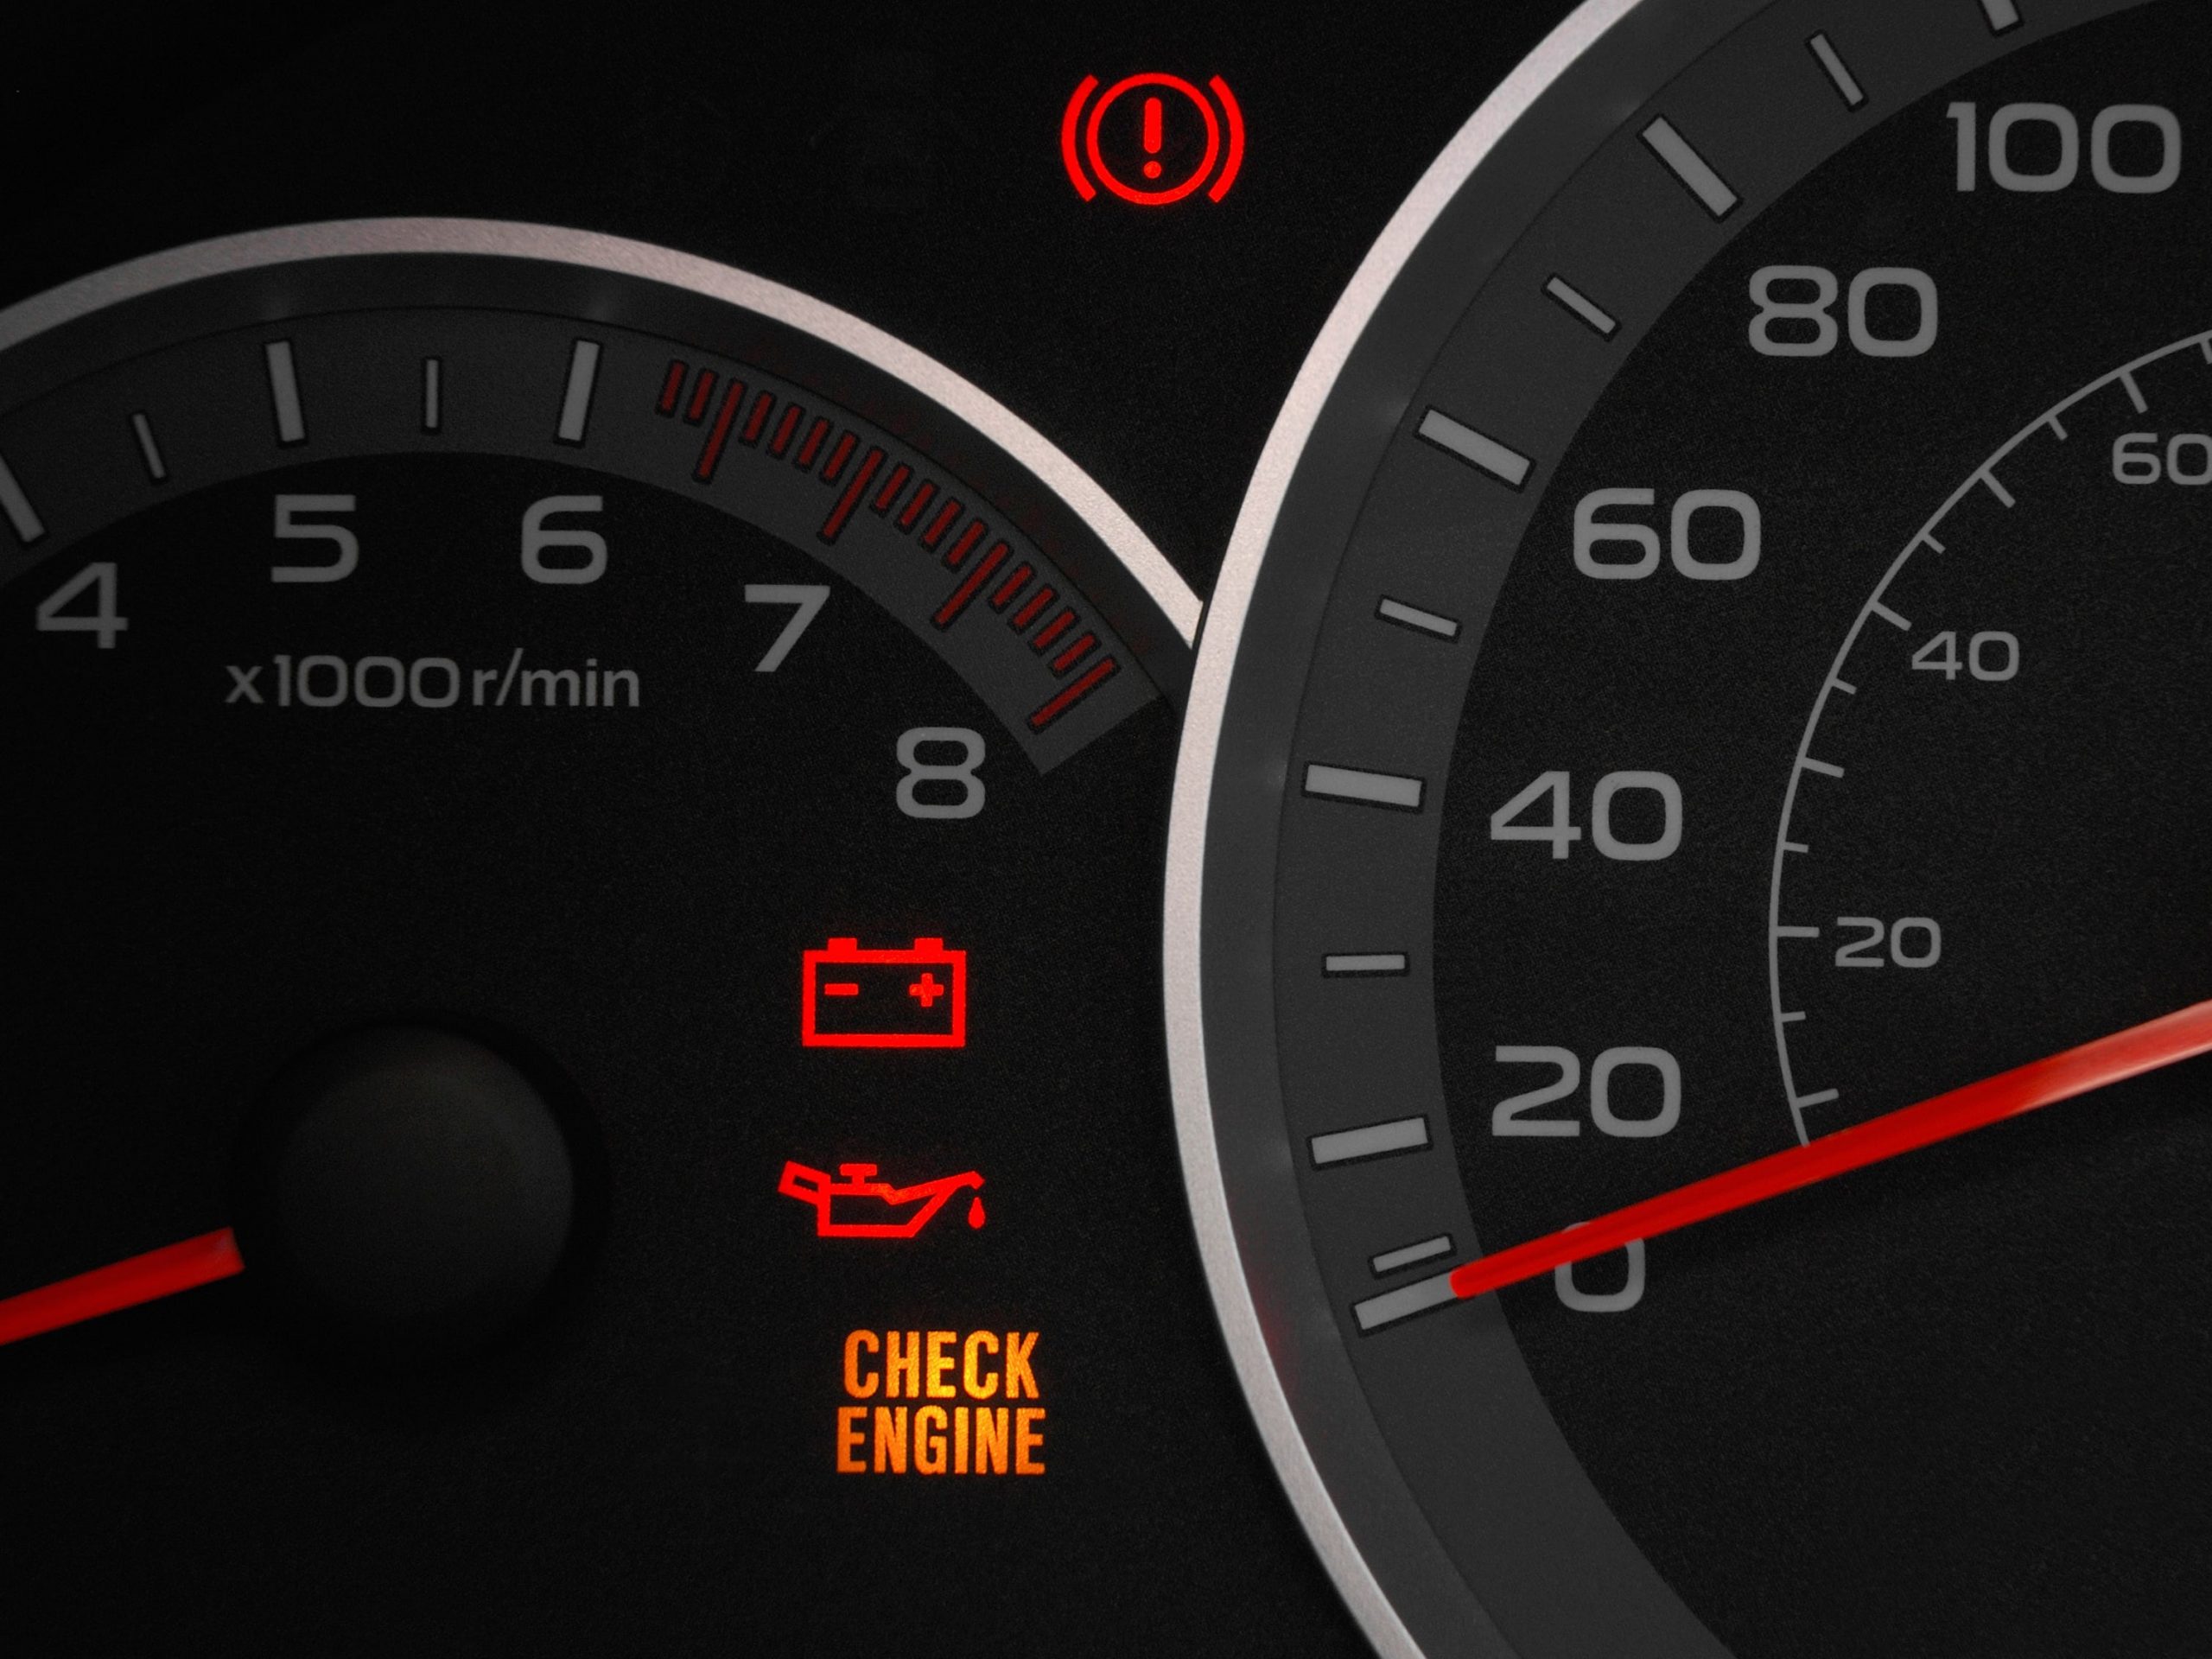 Battery and engine warning light on car dashboard